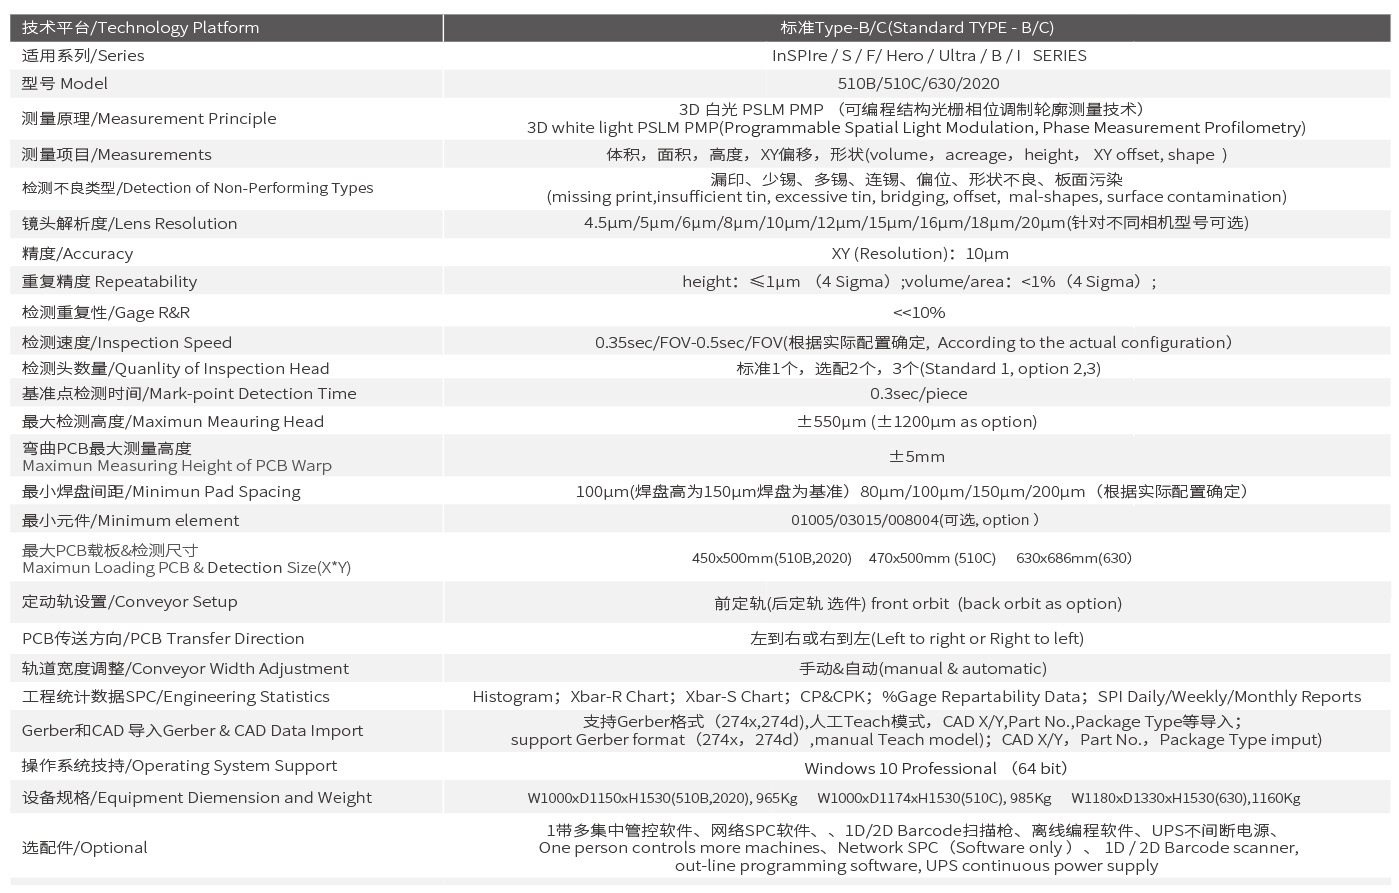 S2020 Technical Specifications